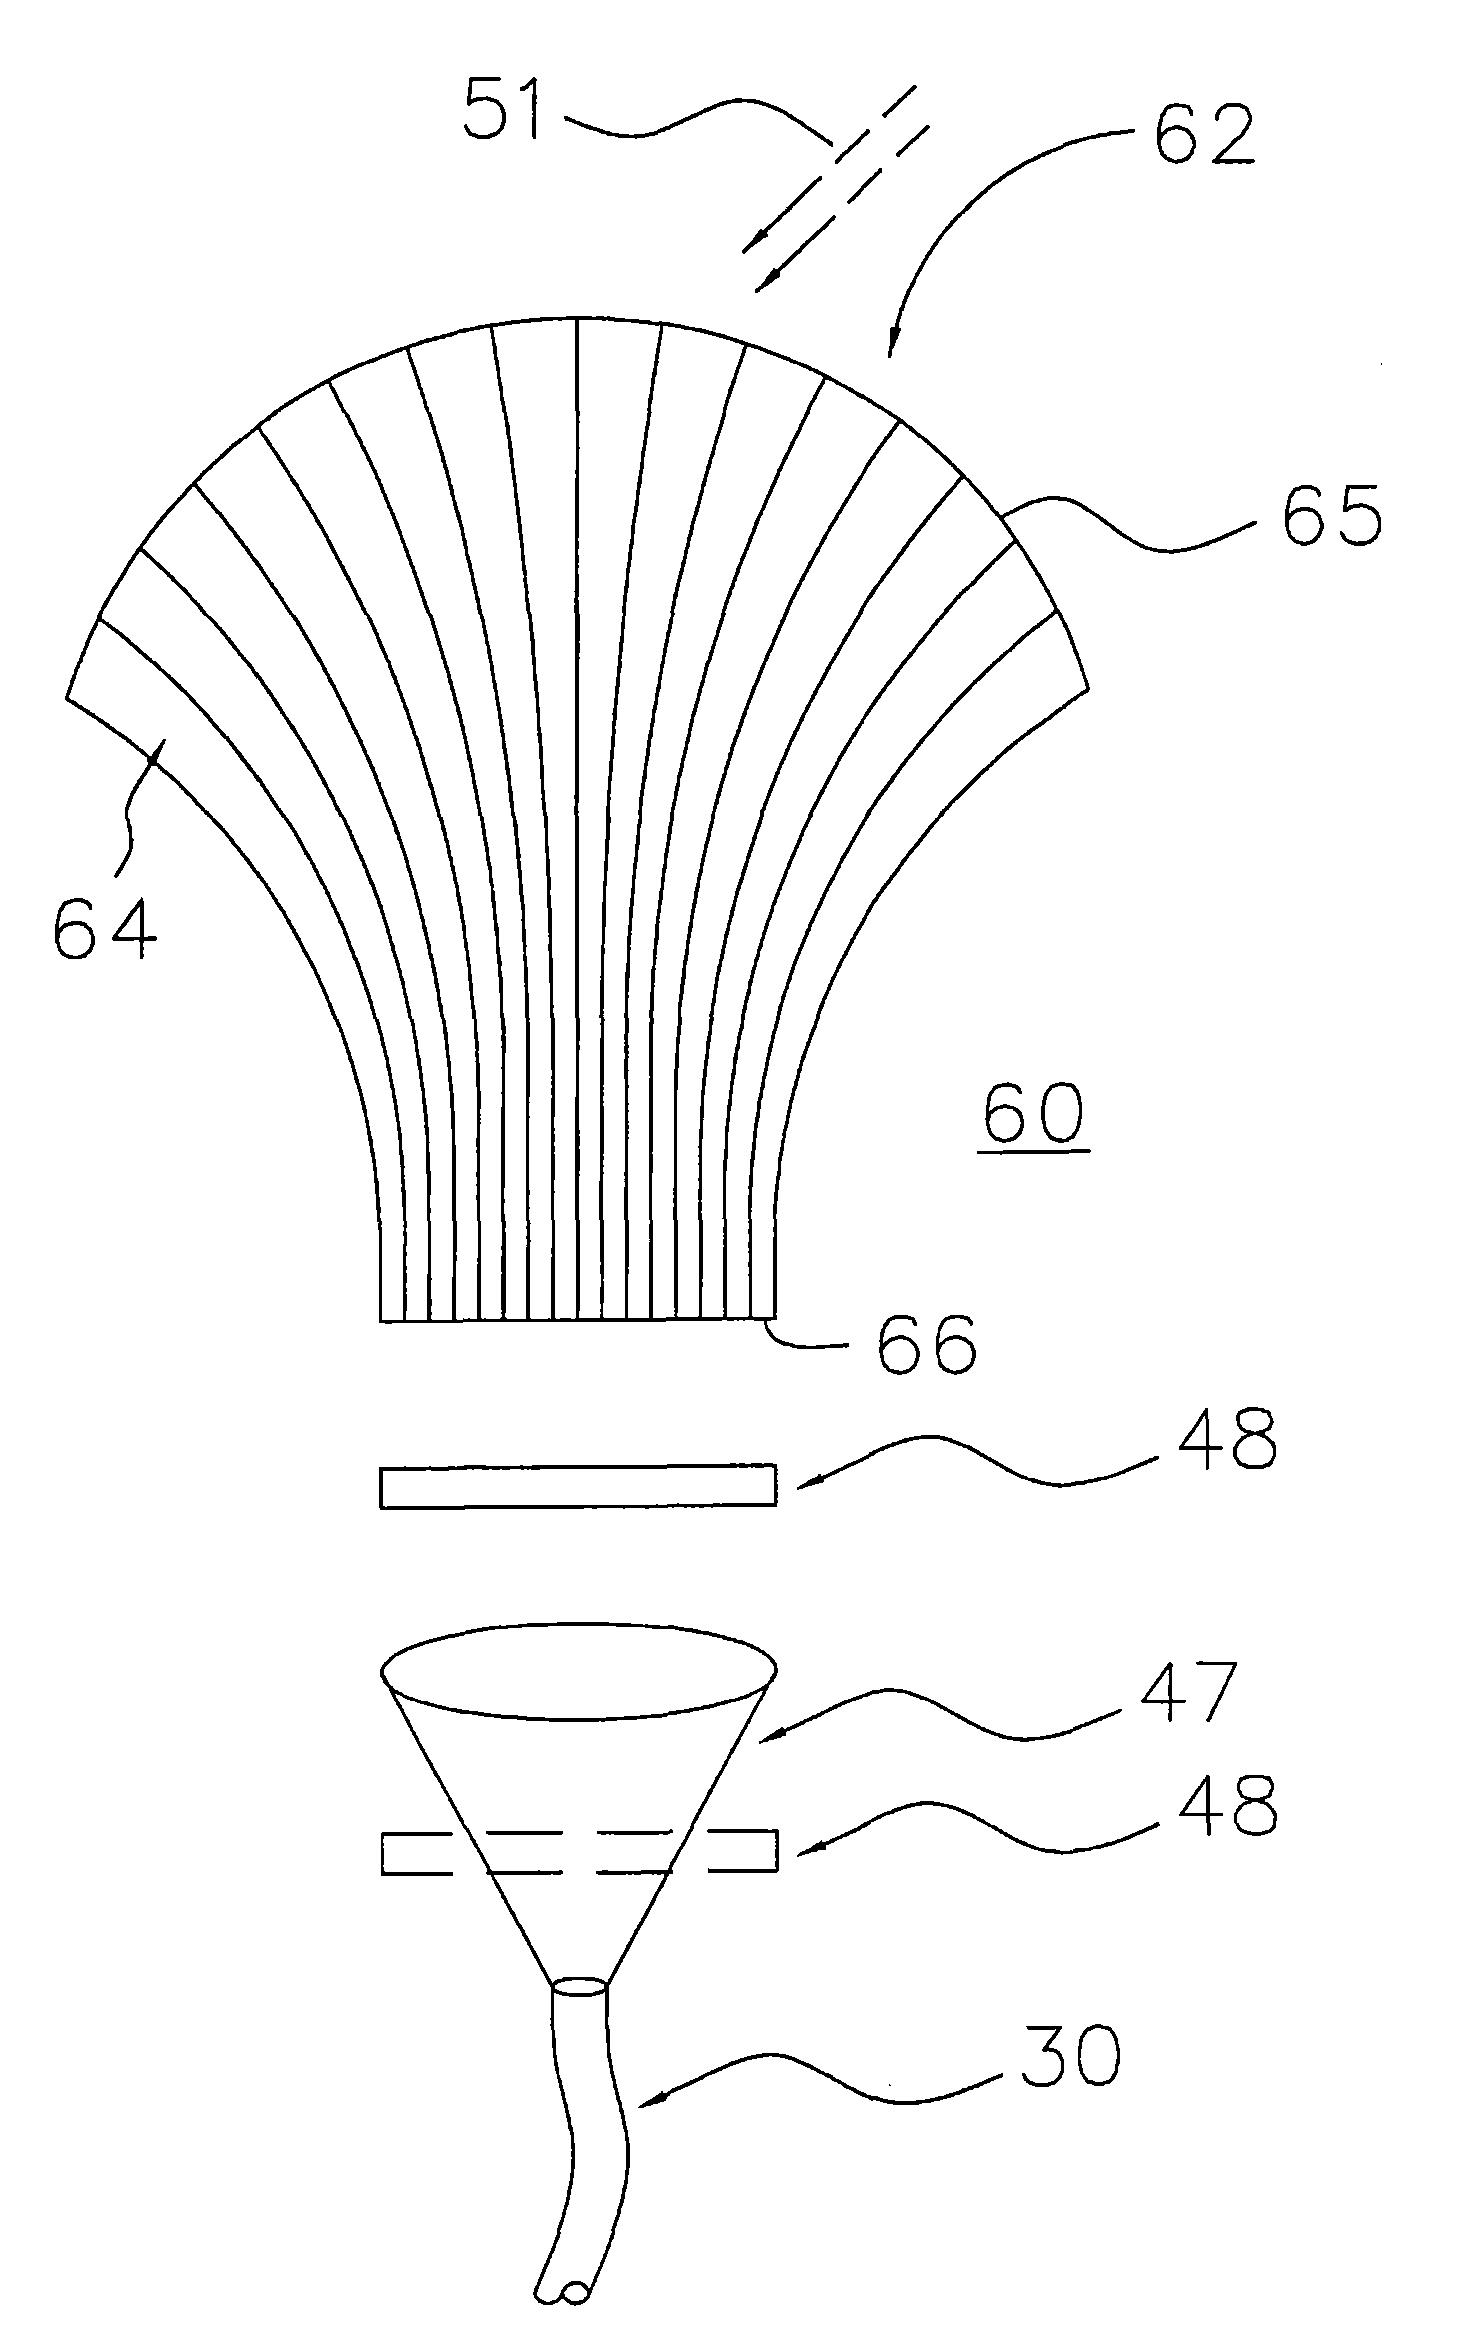 Sunlight collecting device